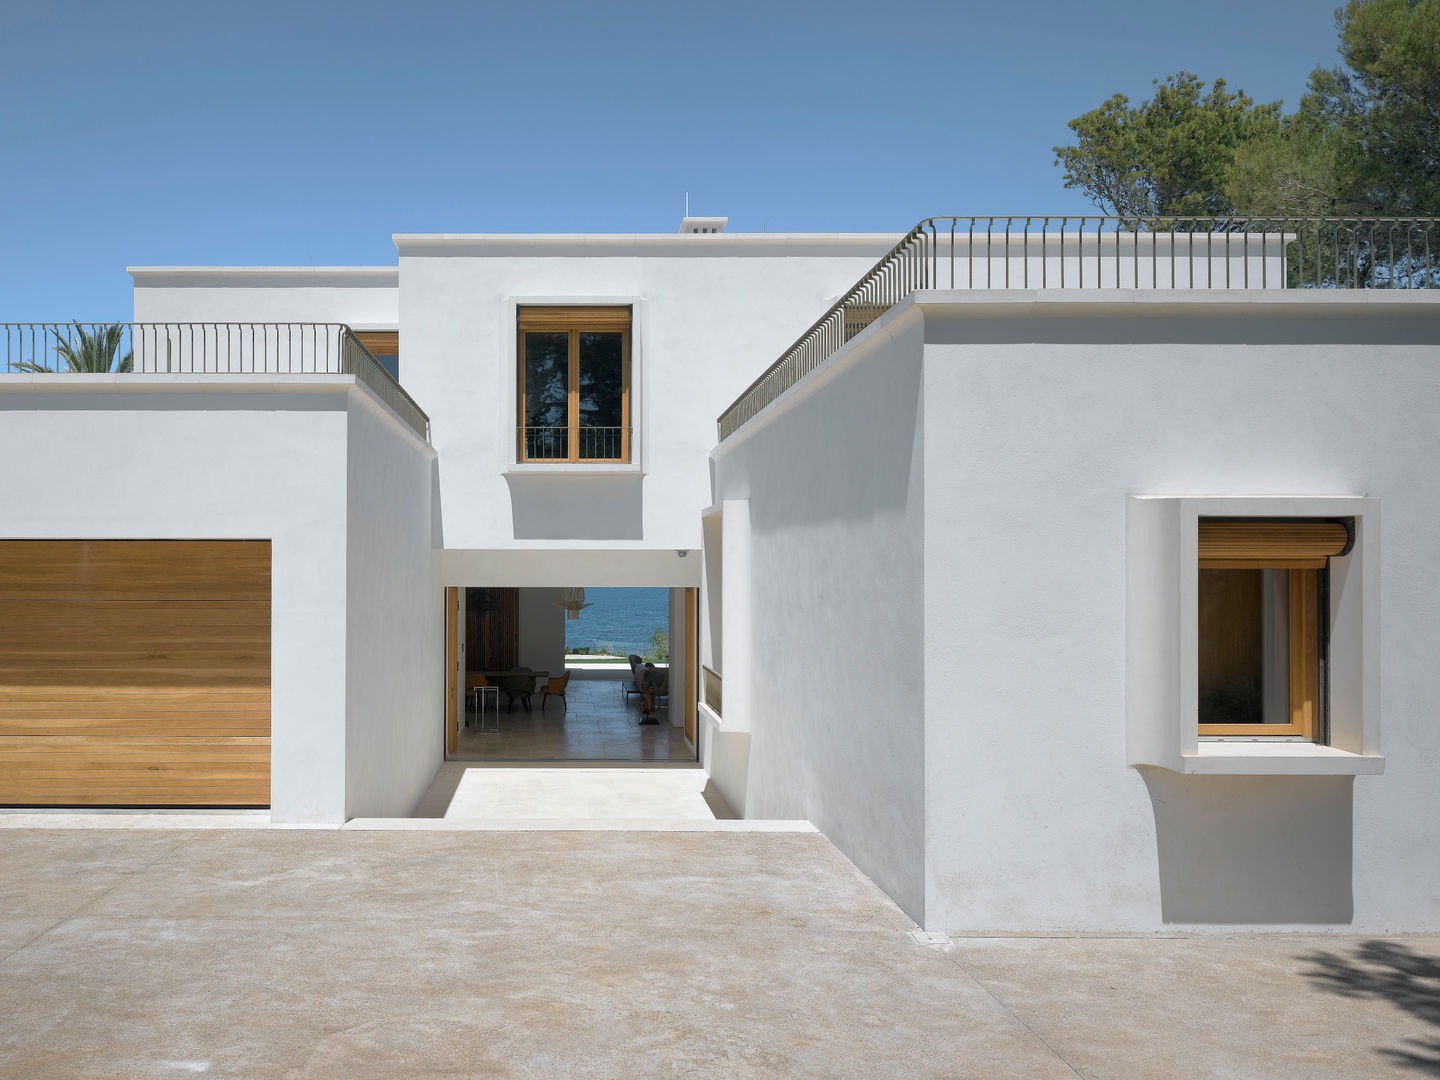 Descender Fronts for optimising passive ventilation strategy homify Mediterranean style house